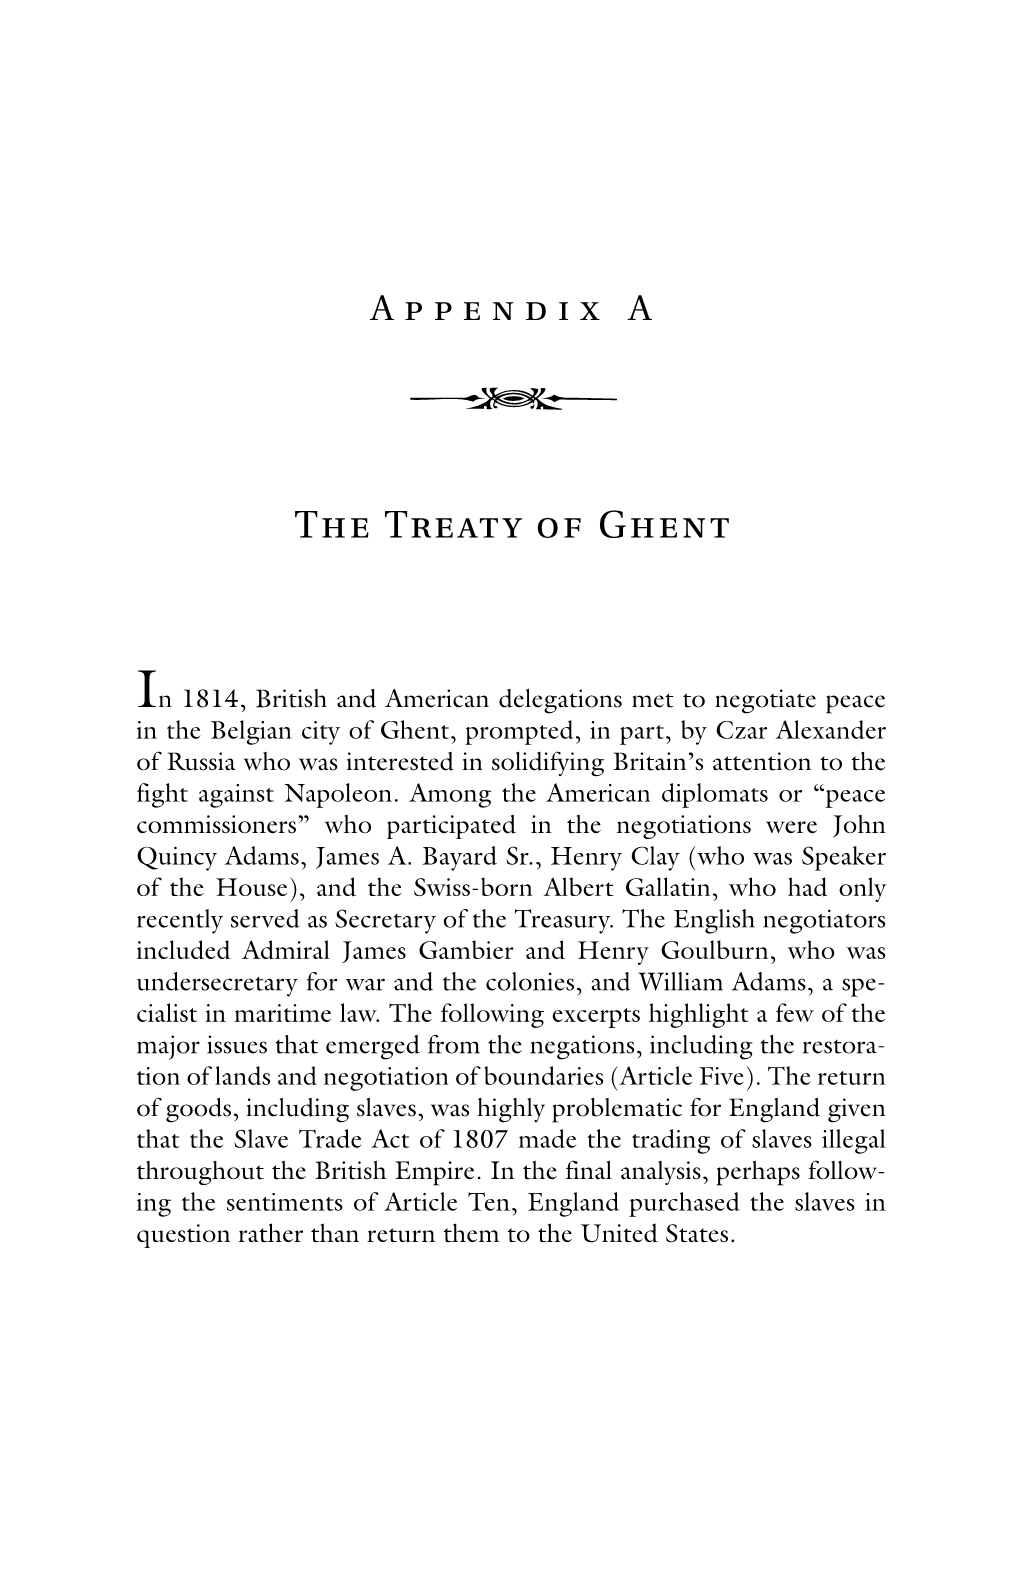 The Treaty of Ghent